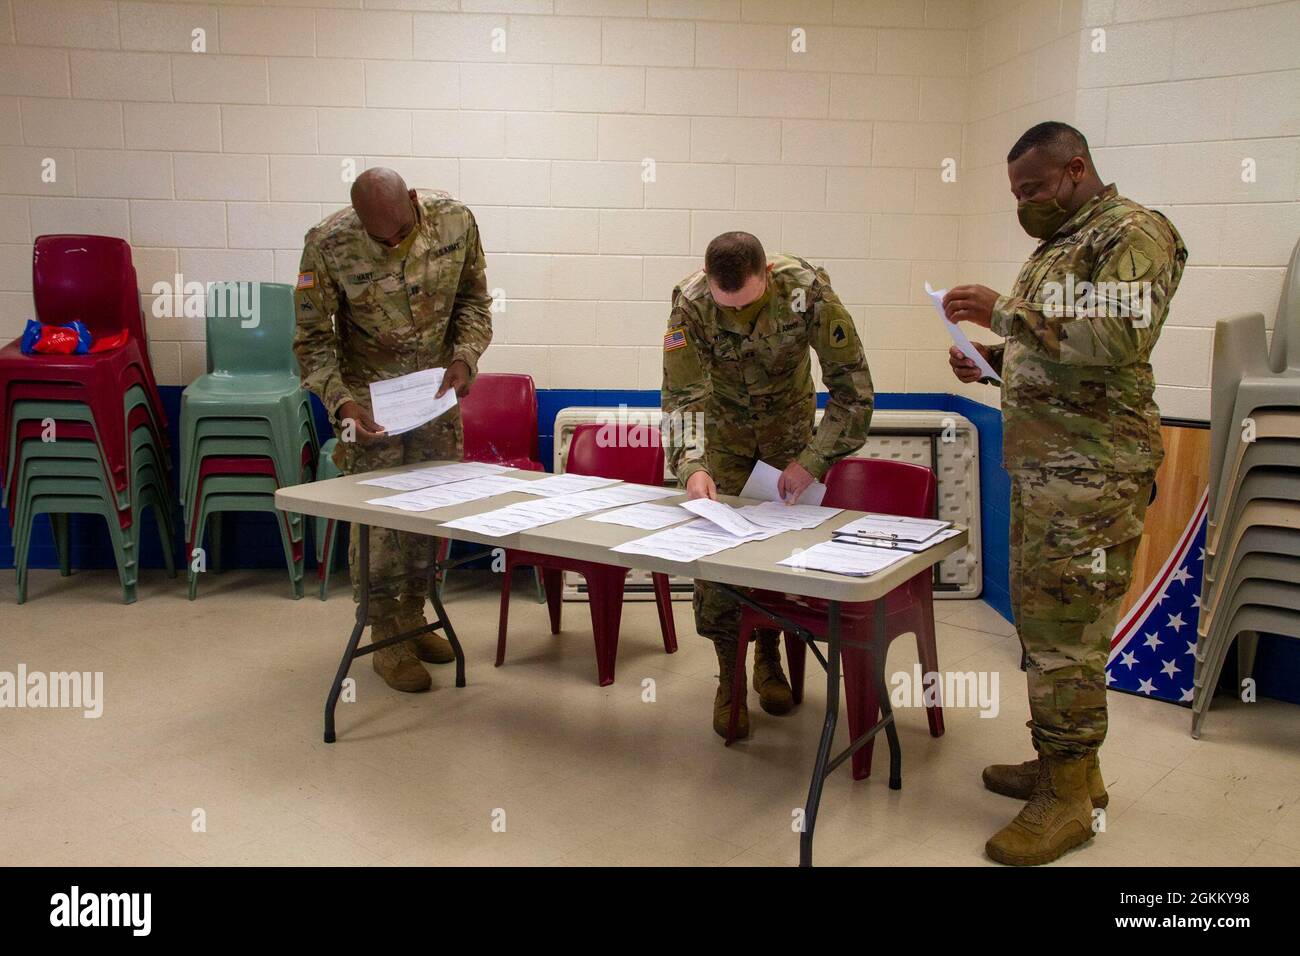 Soldiers assigned to vaccination strike team two, Kentucky National Guard, prepare documents prior to administering COVID-19 vaccinations to detainees at the Big Sandy Regional Detention Center, Paintsville, Ky. May 20. This comes in part to COVID-19 vaccine distrubution throughout the commonwealth. Stock Photo